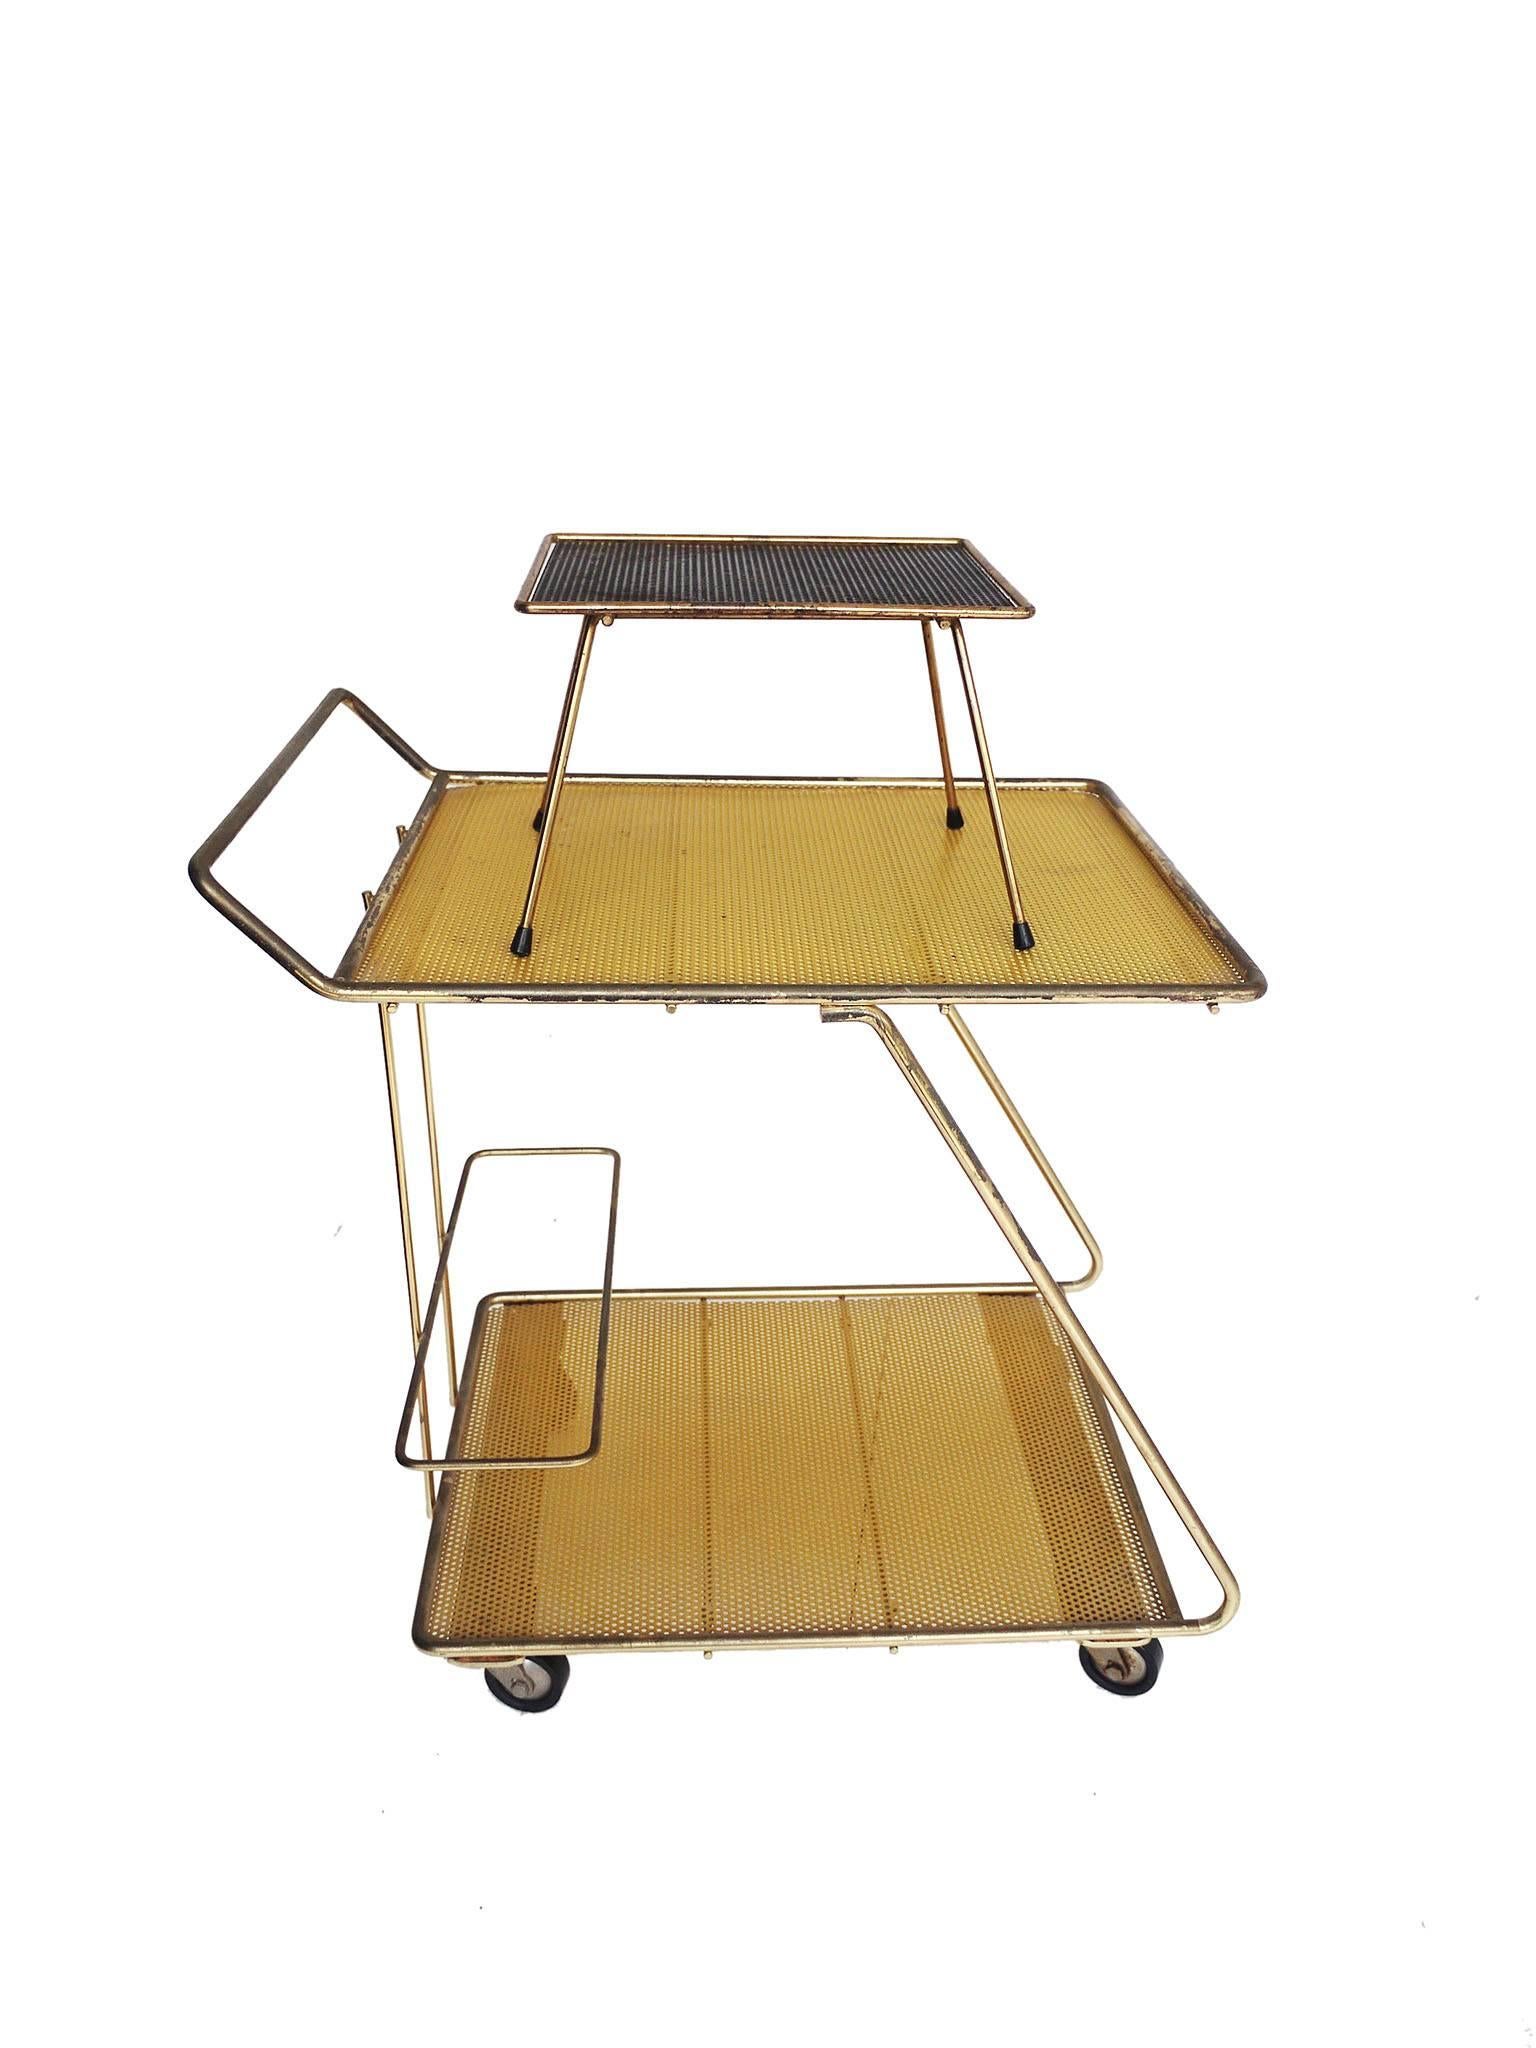 Bar trolley, magazine Stand and a small side table made of perforated metal and brass by Mathieu Mategot in the 1950s.
Extraordinarily good condition with a beautiful patina.
The casters of the trolley were probably replaced.
Trolley: W